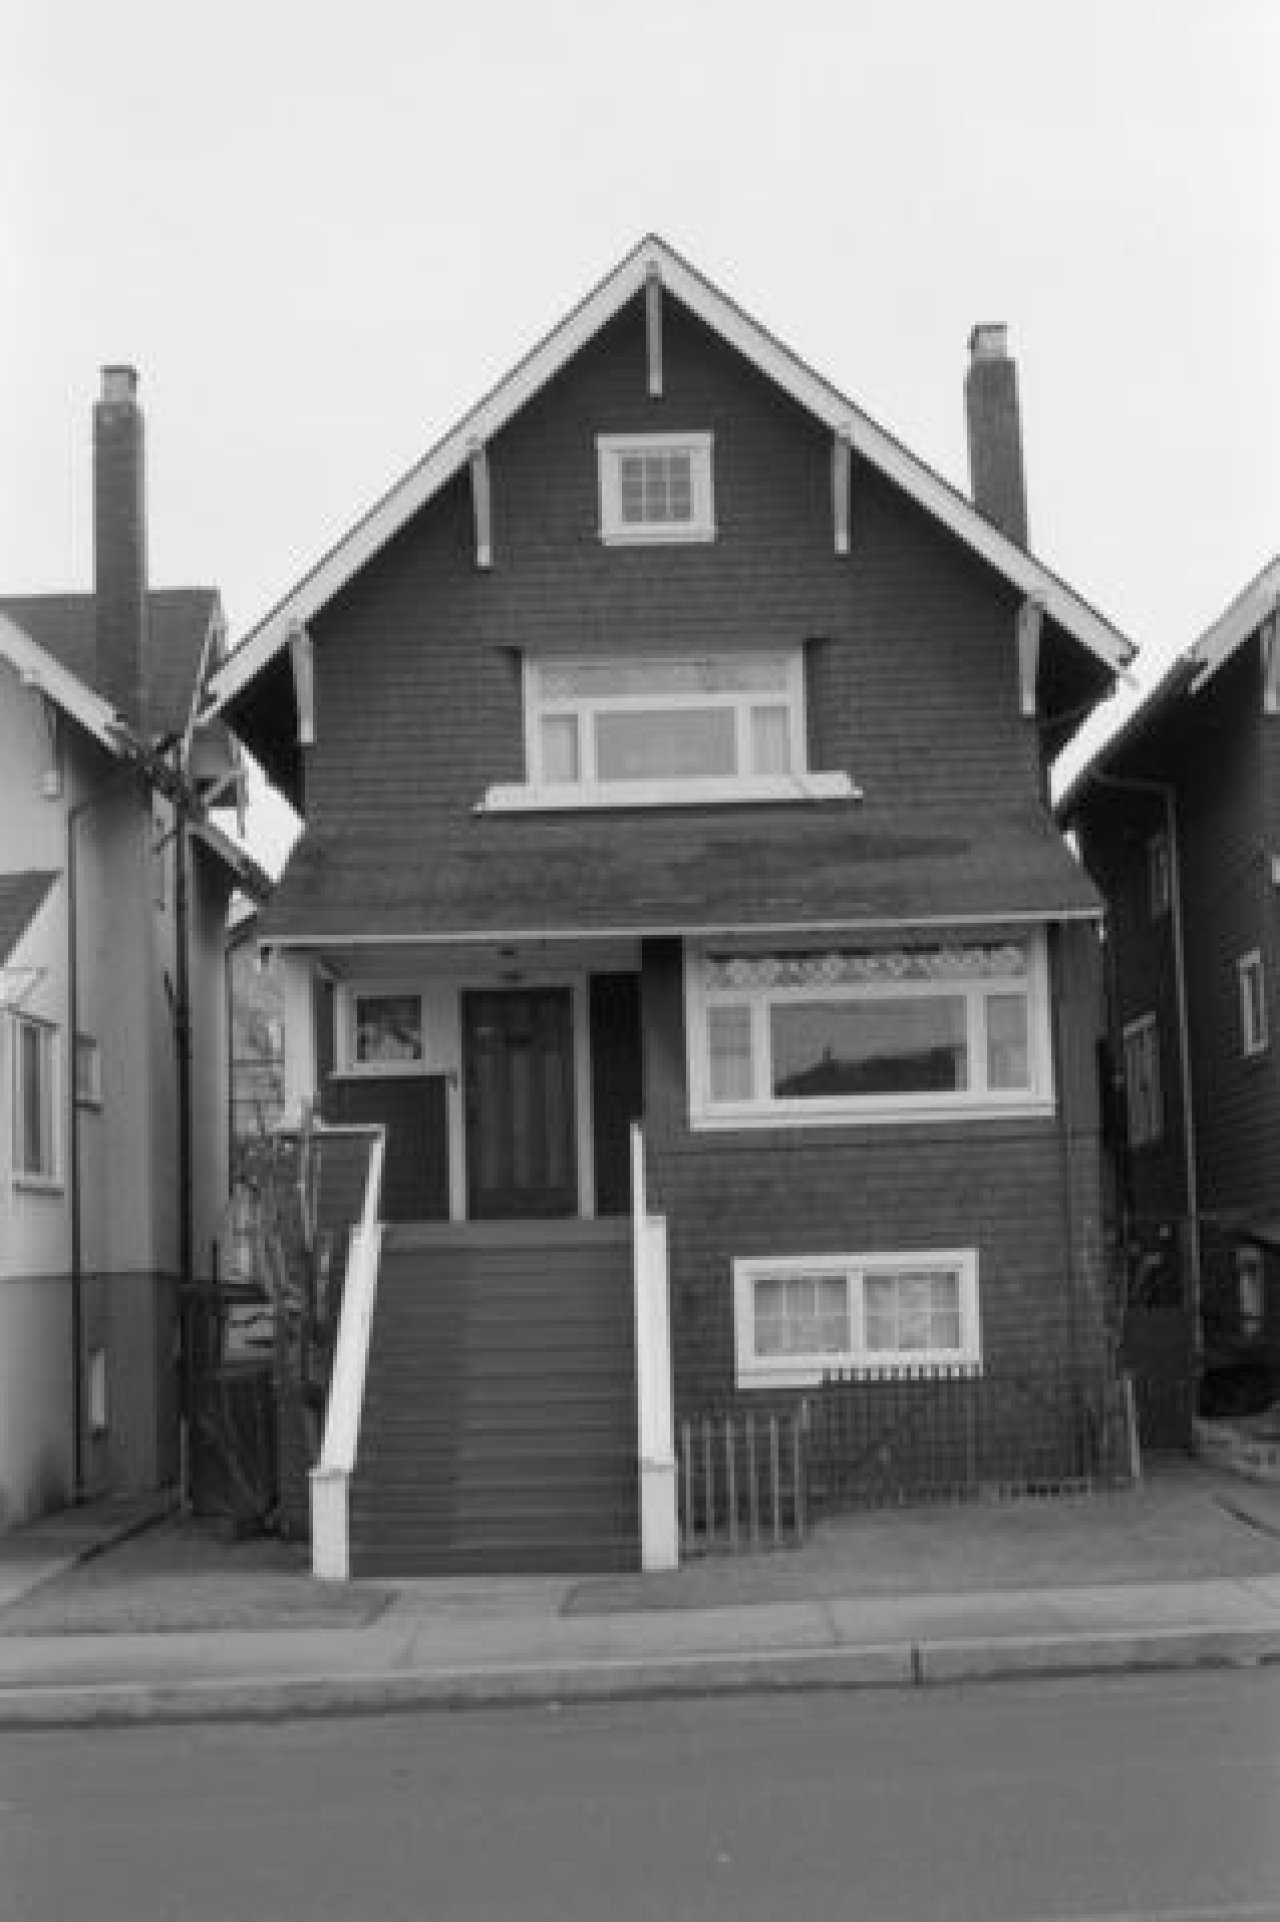 2216 MacDonald St 1985. Source: City of Vancouver Archives 791 0749